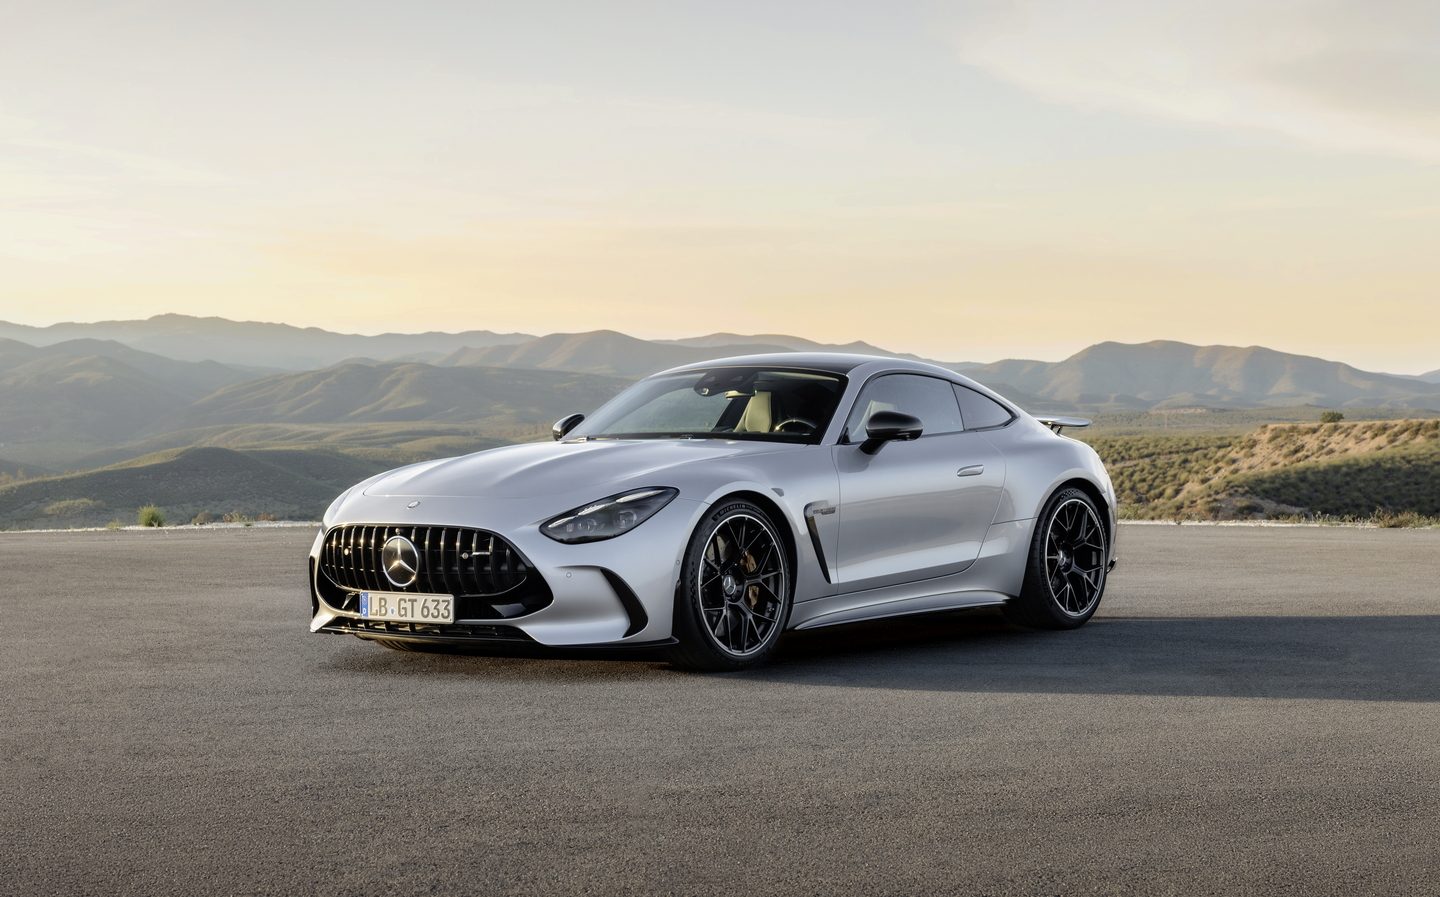 Mercedes-AMG GT evolves into a more practical sports car with four